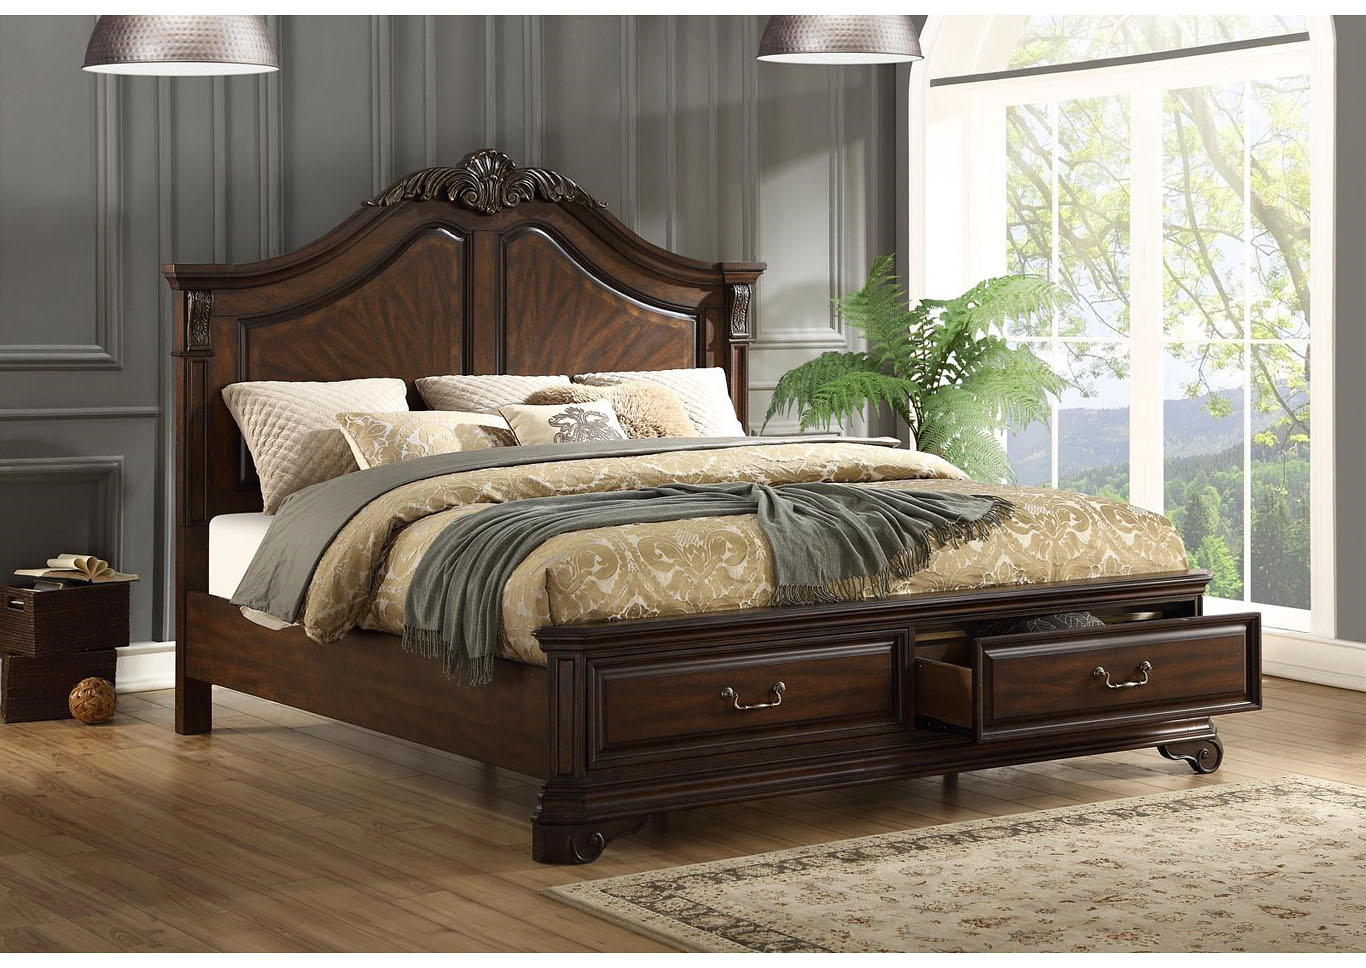 Andrea 4pc Traditional Storage Bedroom Group Eastern King,Instore